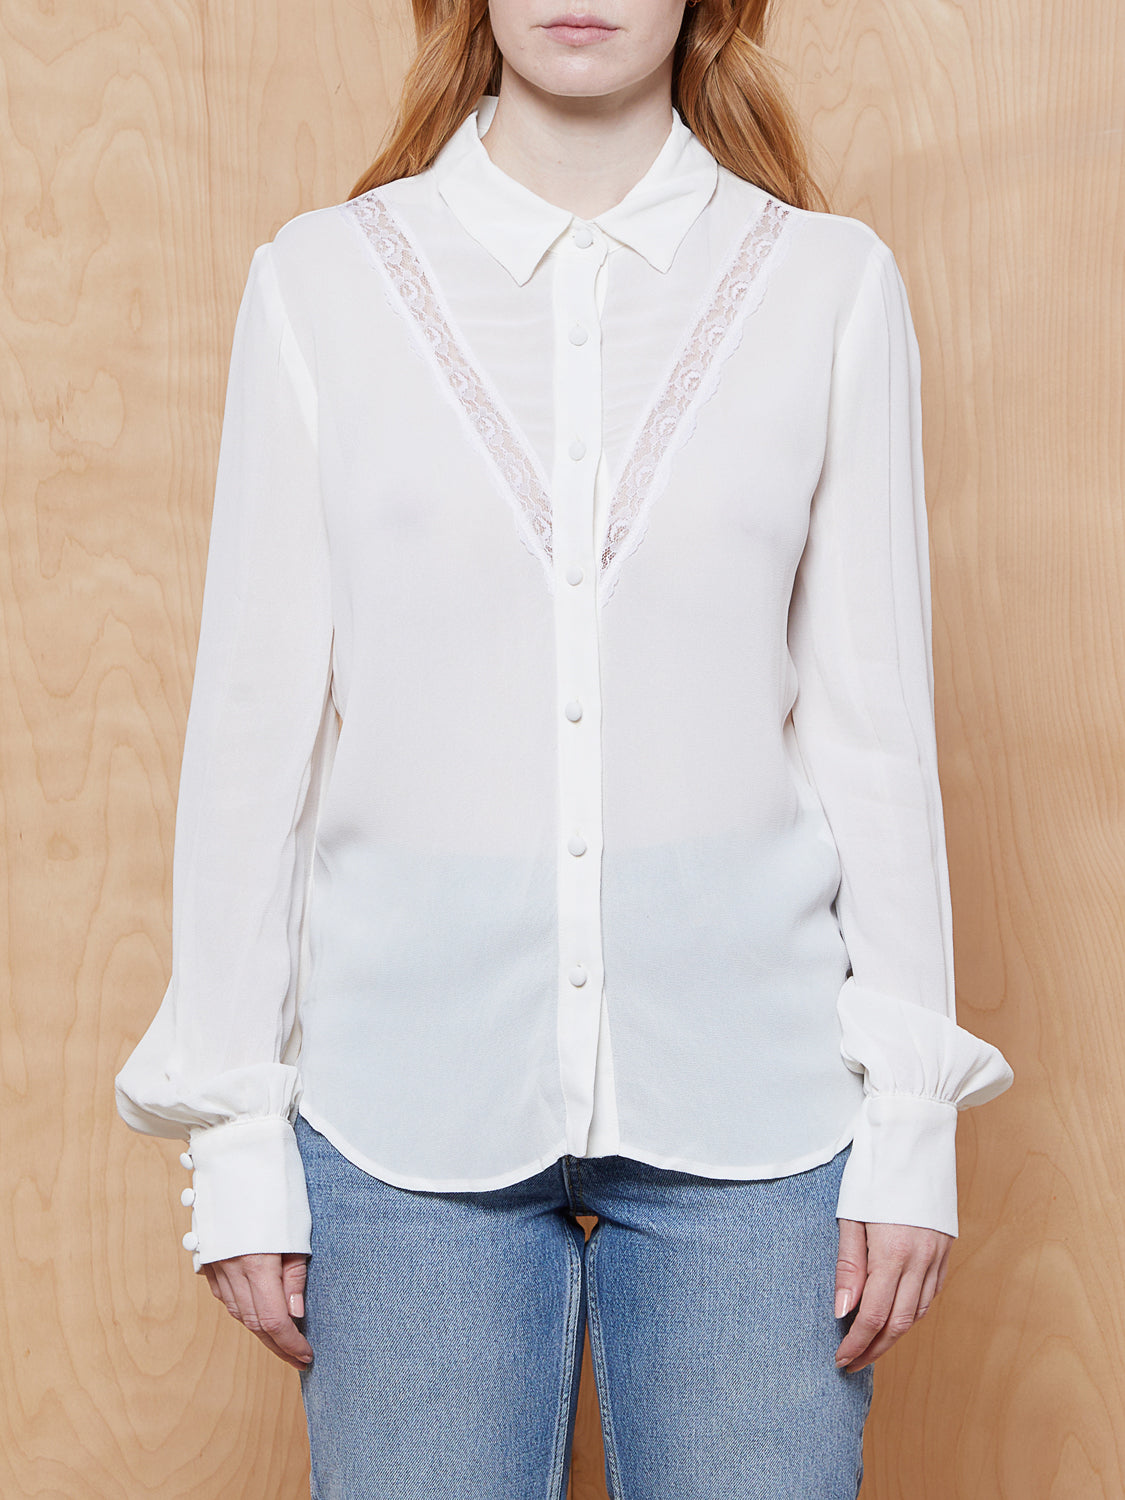 Reformation White Lace Button Up